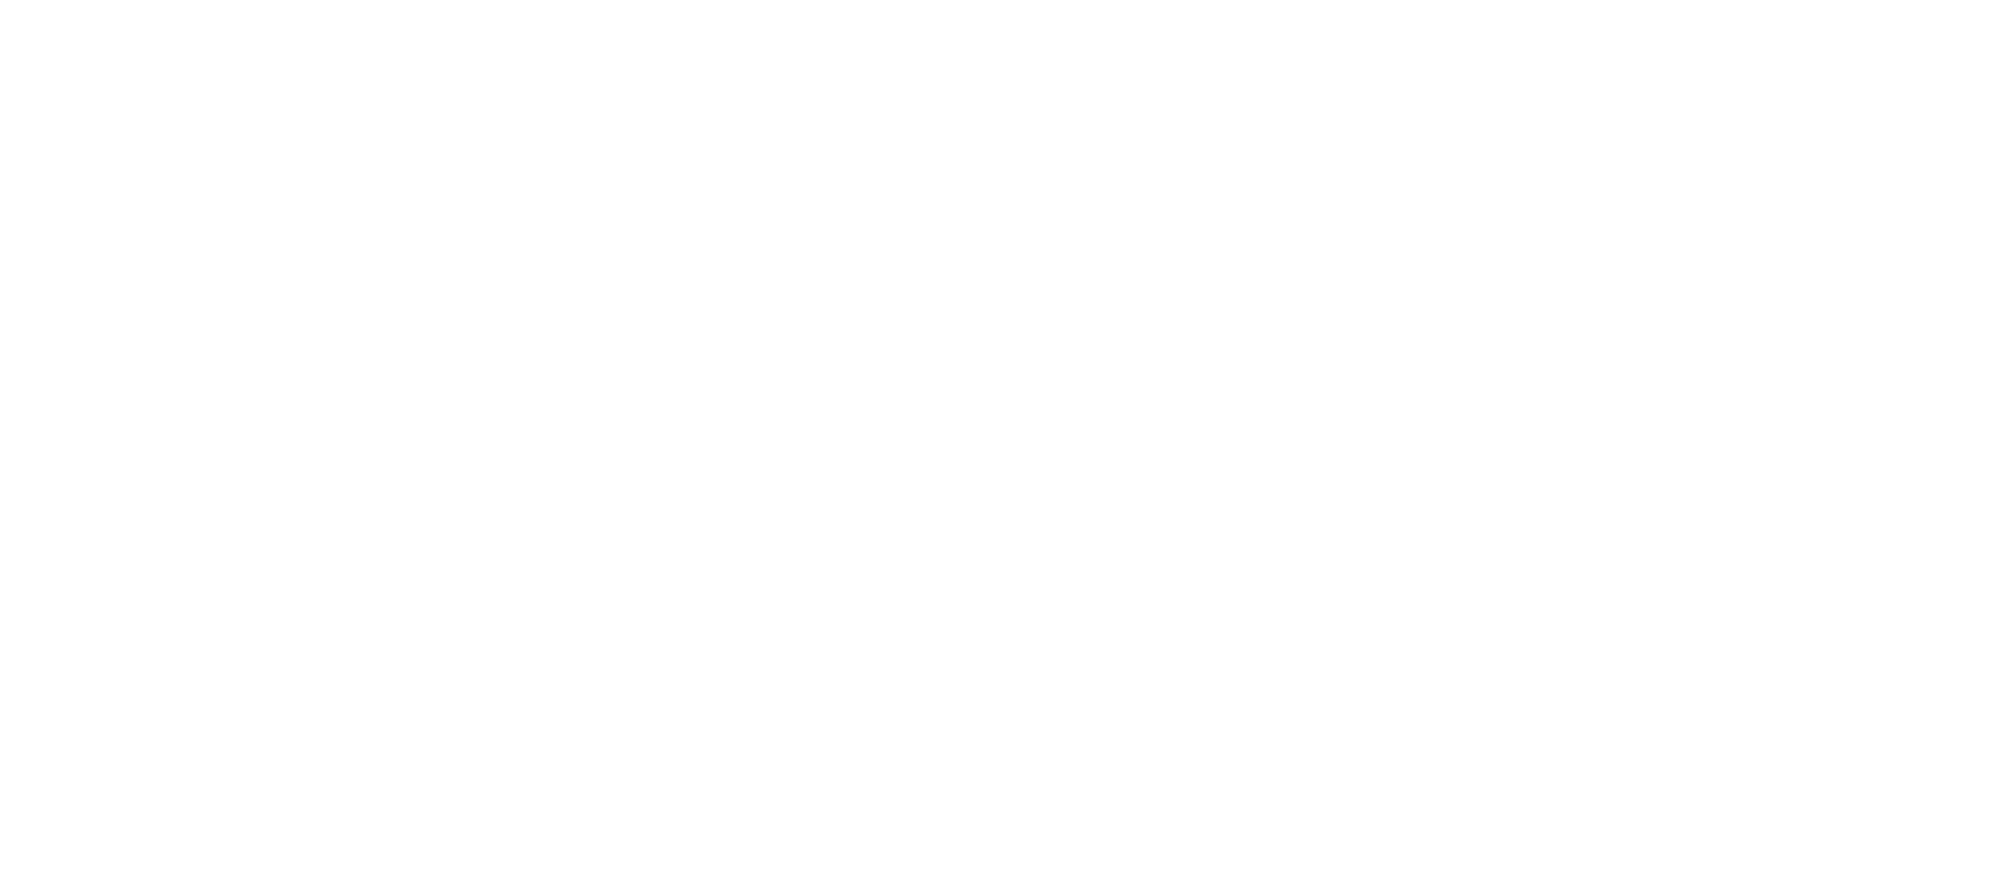 devHour - cooking with chef logo white